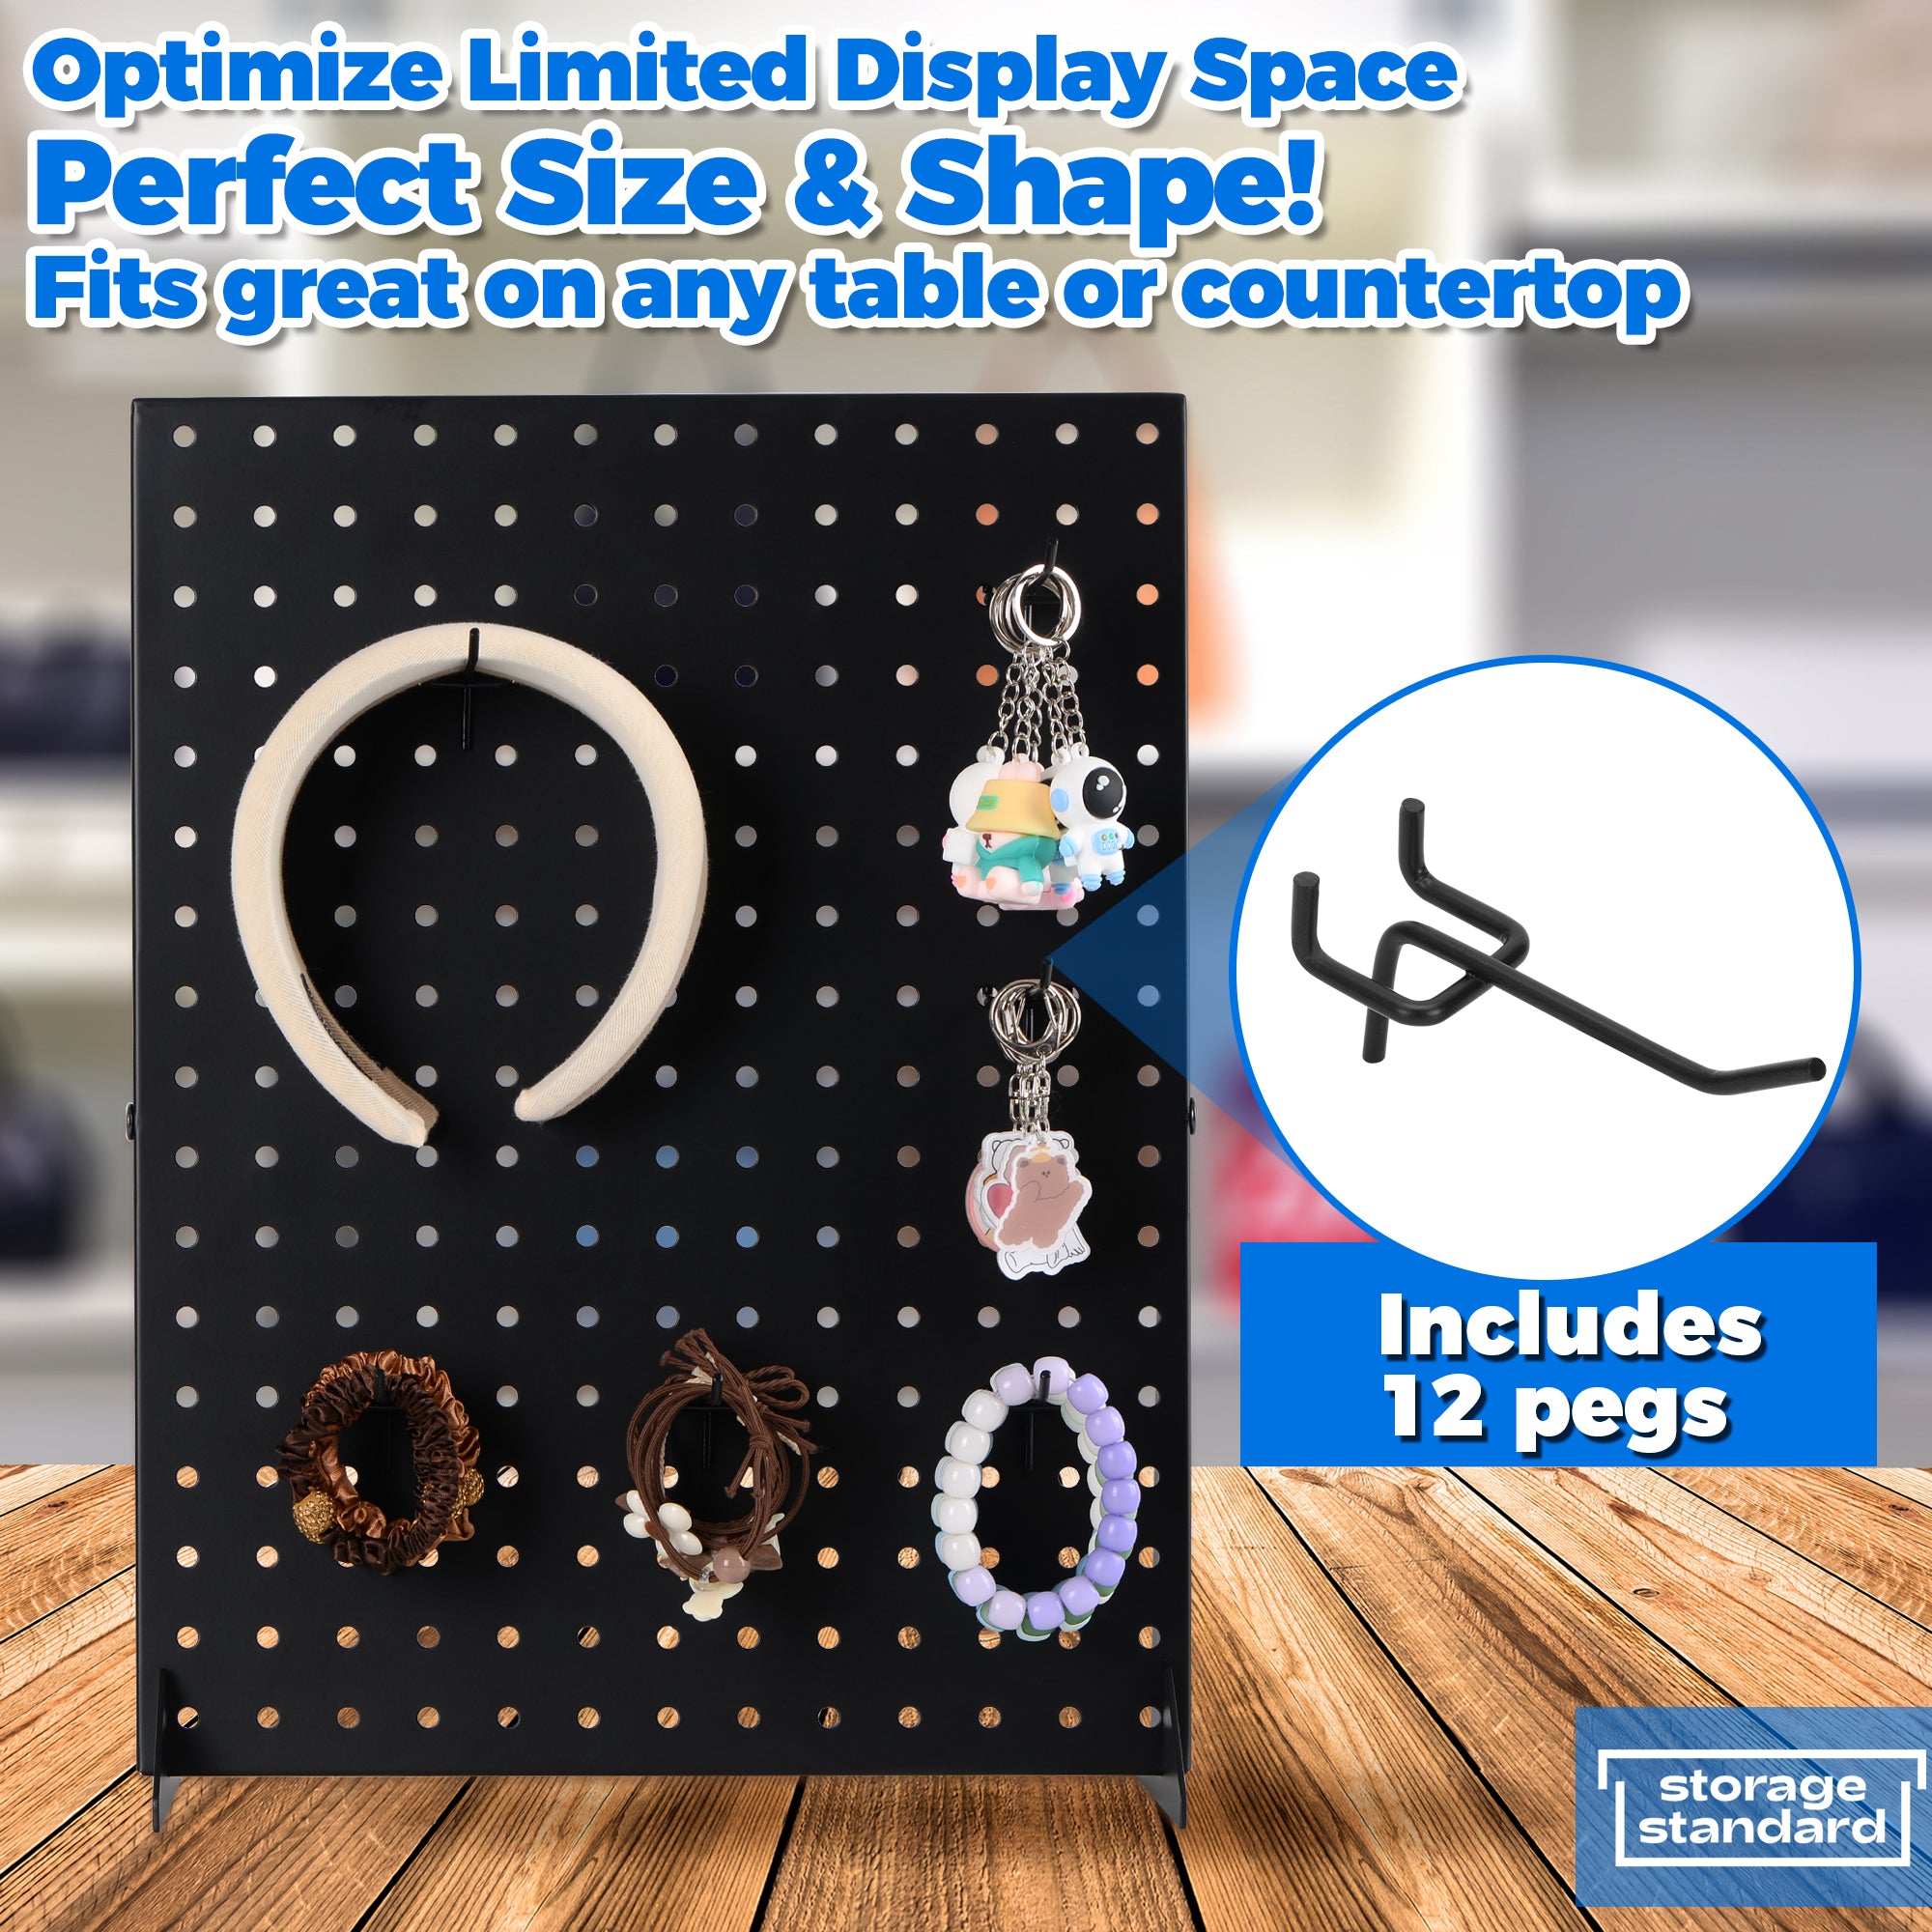 Pegboard Display Stand With 12 Peg Hooks for Retail Craft Shows & Fairs - Metal Product Merchandise Display Rack for Selling Accessories, Jewelry, Pin Display Stands for Boutique, Stores, Vendors & Events - 17" x 13”